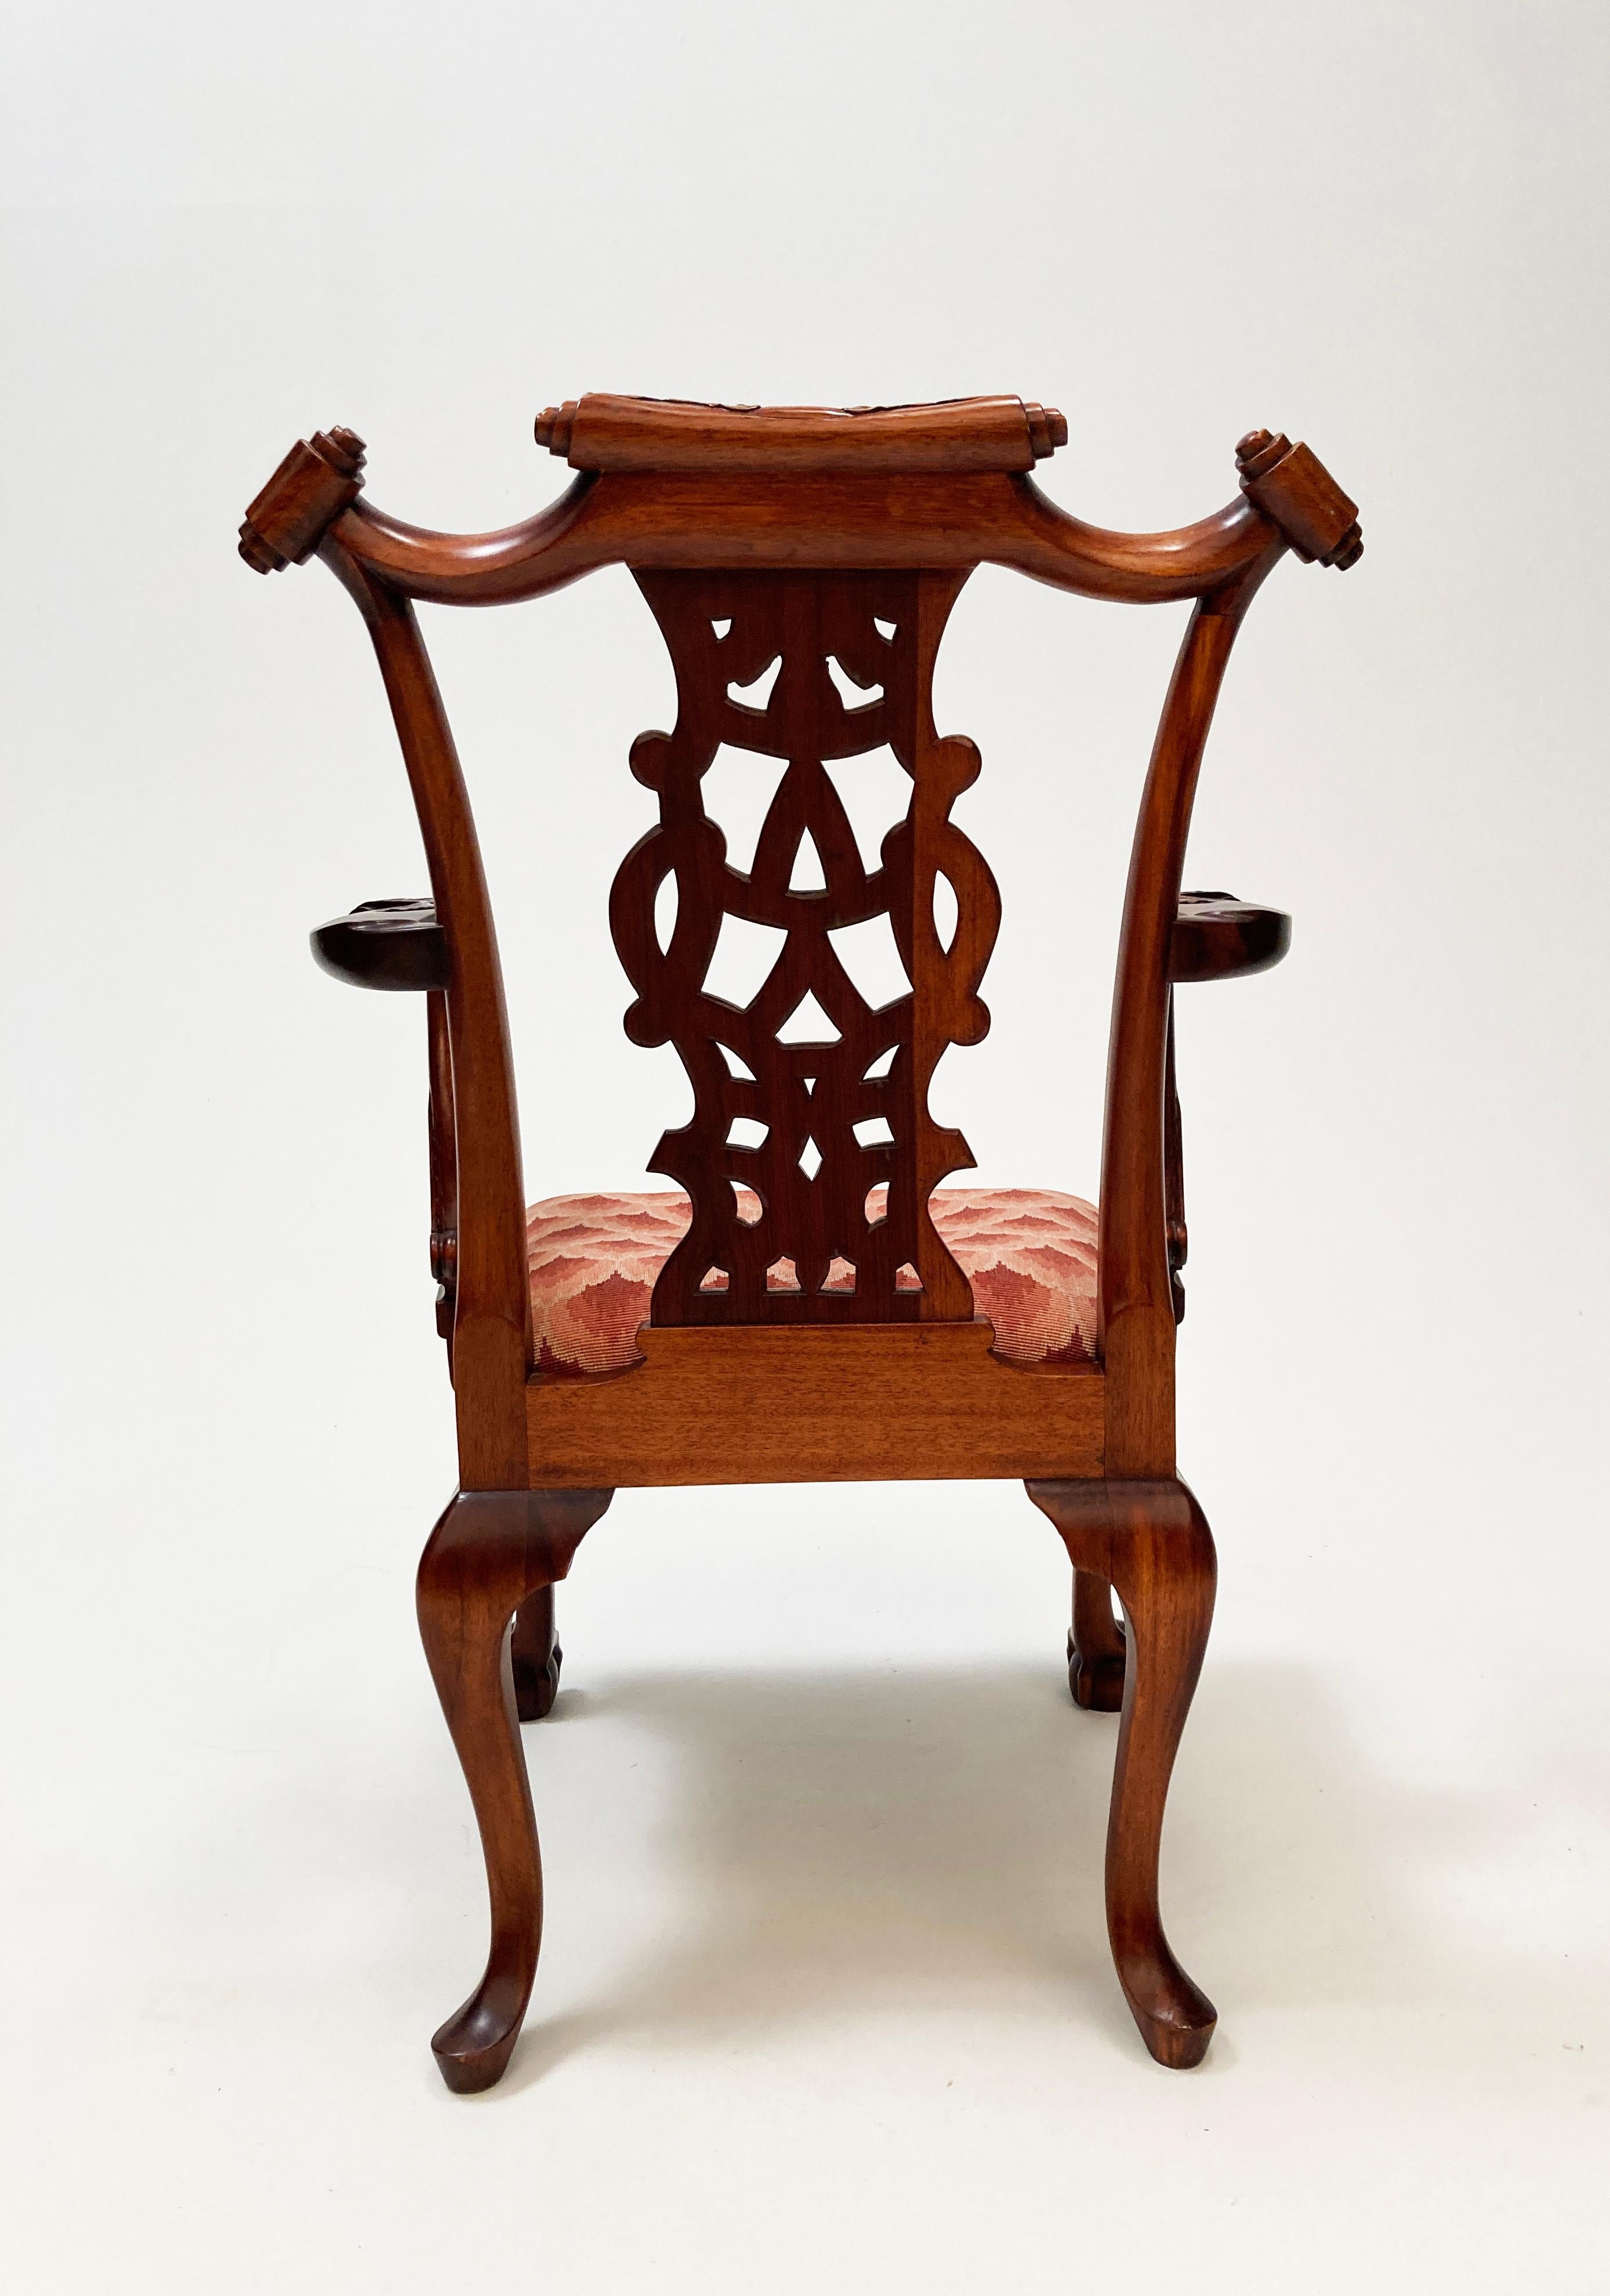 Hand-Carved Early 20th Century Mahogany Irish Antique Replica Chippendale Chairs- Set of 2 For Sale